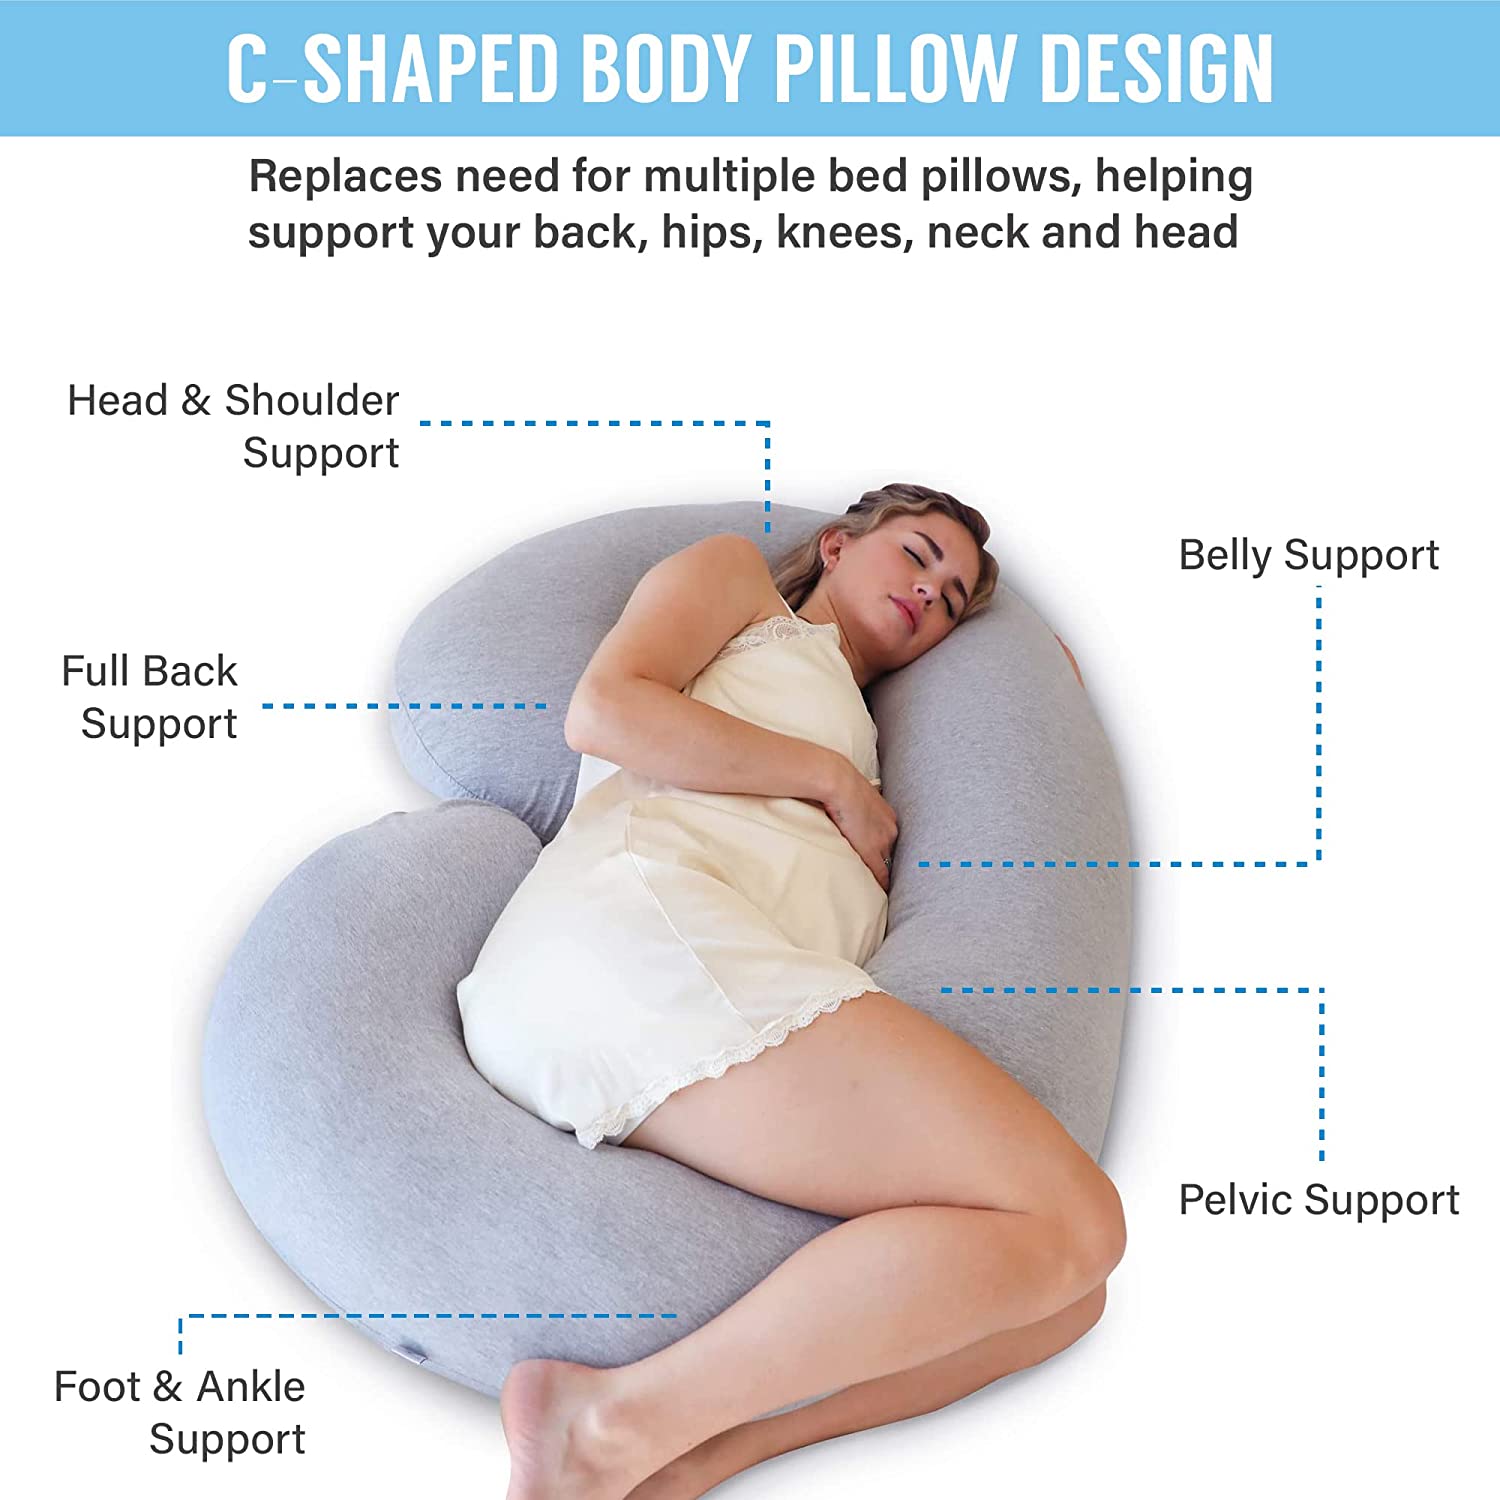 PharMeDoc Pregnancy Pillow - C-Shaped Body Pillow for Pregnant Women - Jersey Cover, Gray - image 2 of 6